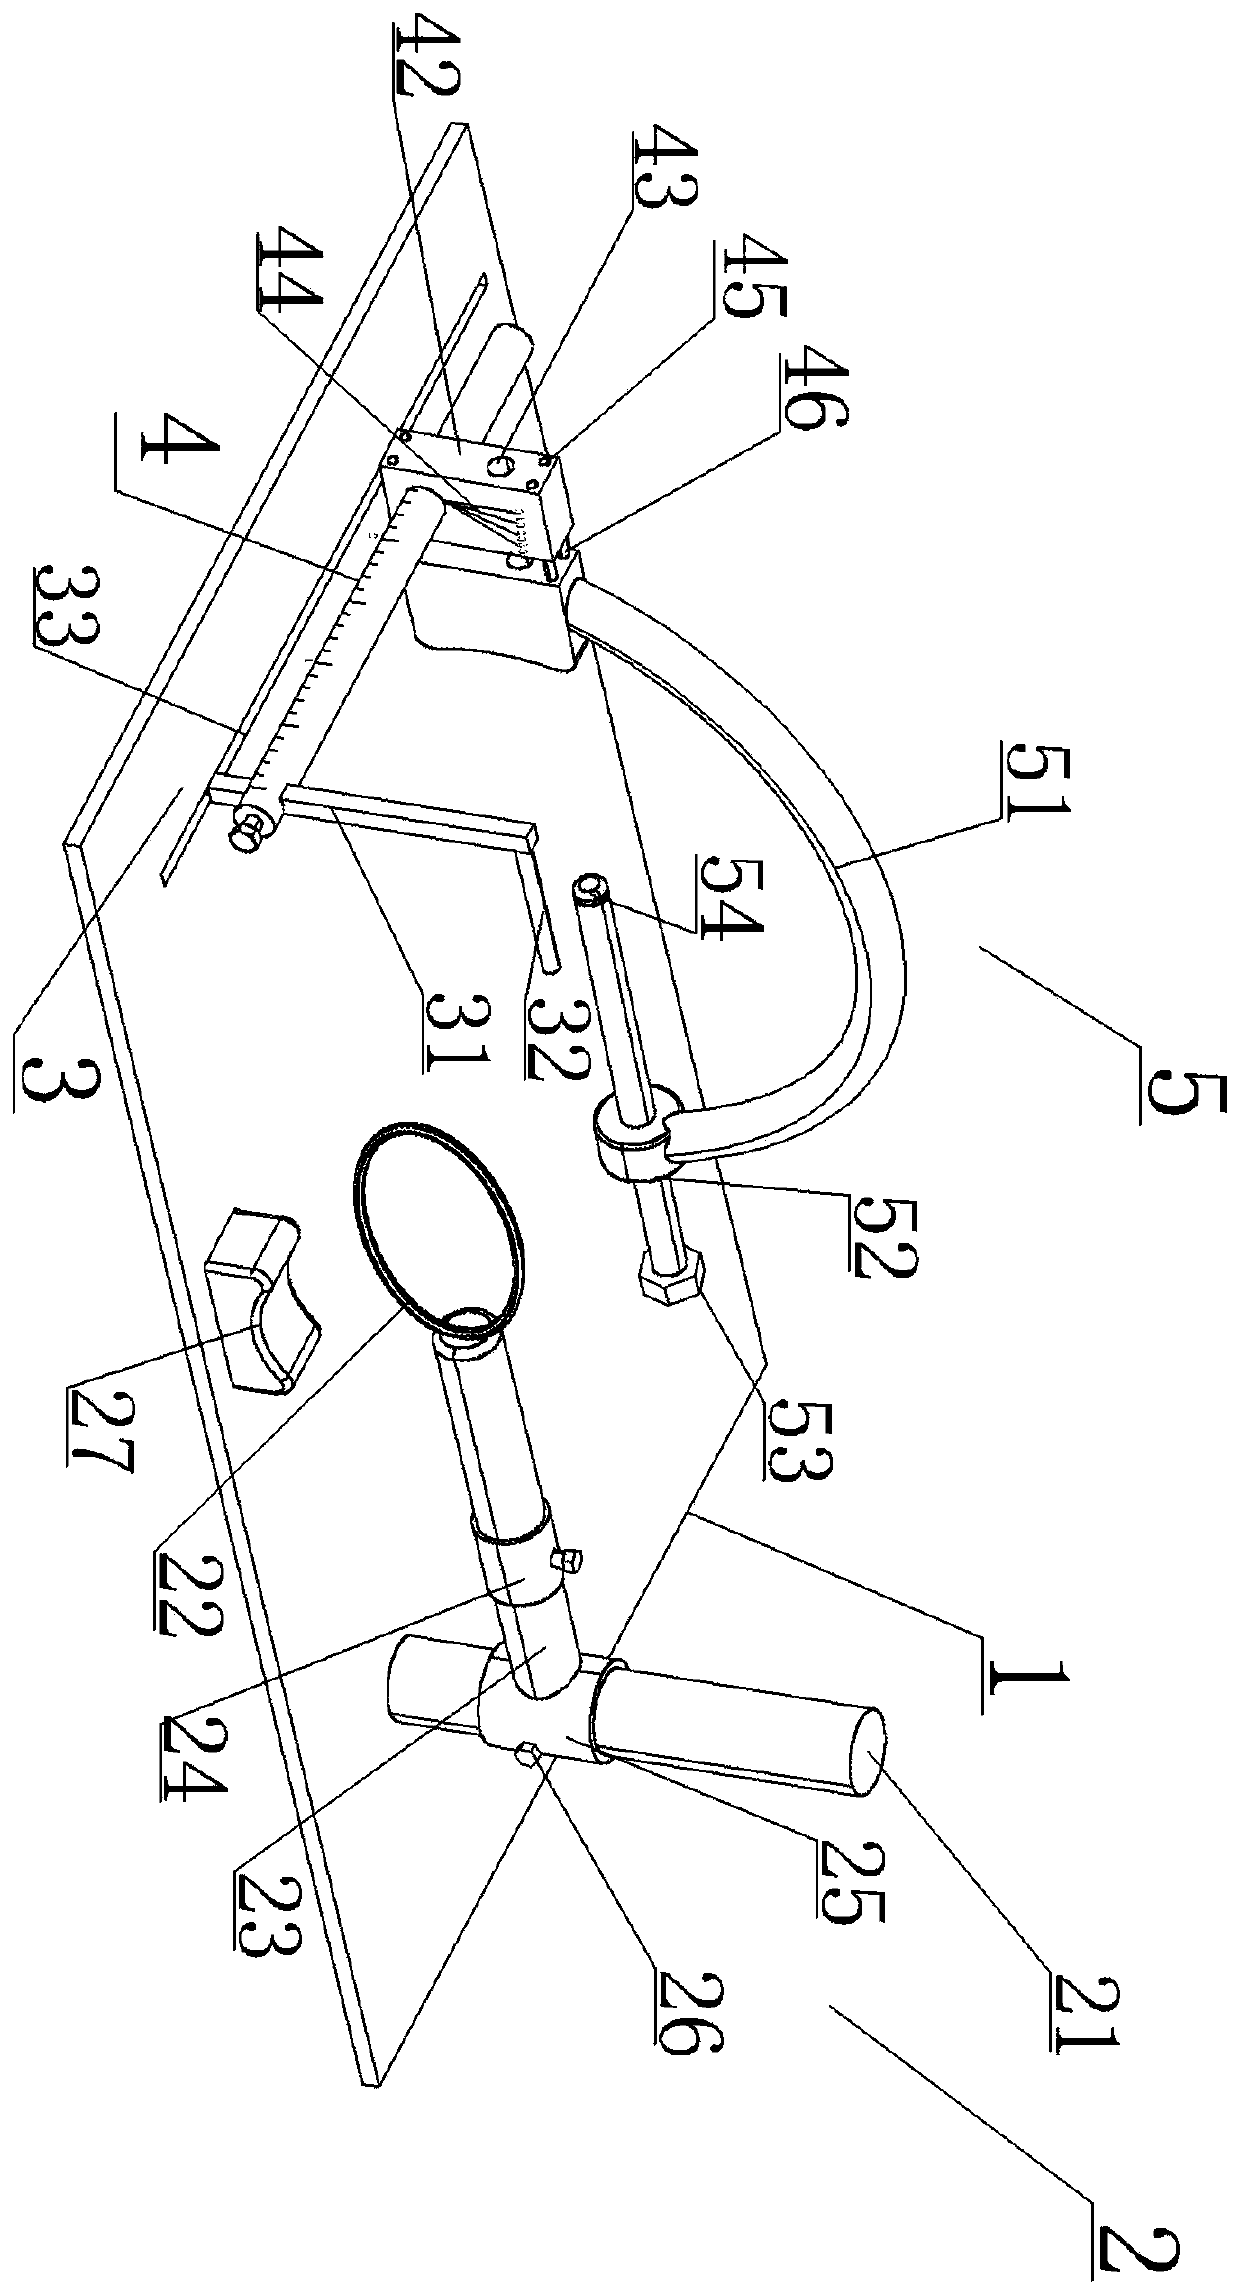 Tibiofibular syndesmosis reduction and screw placement guide device